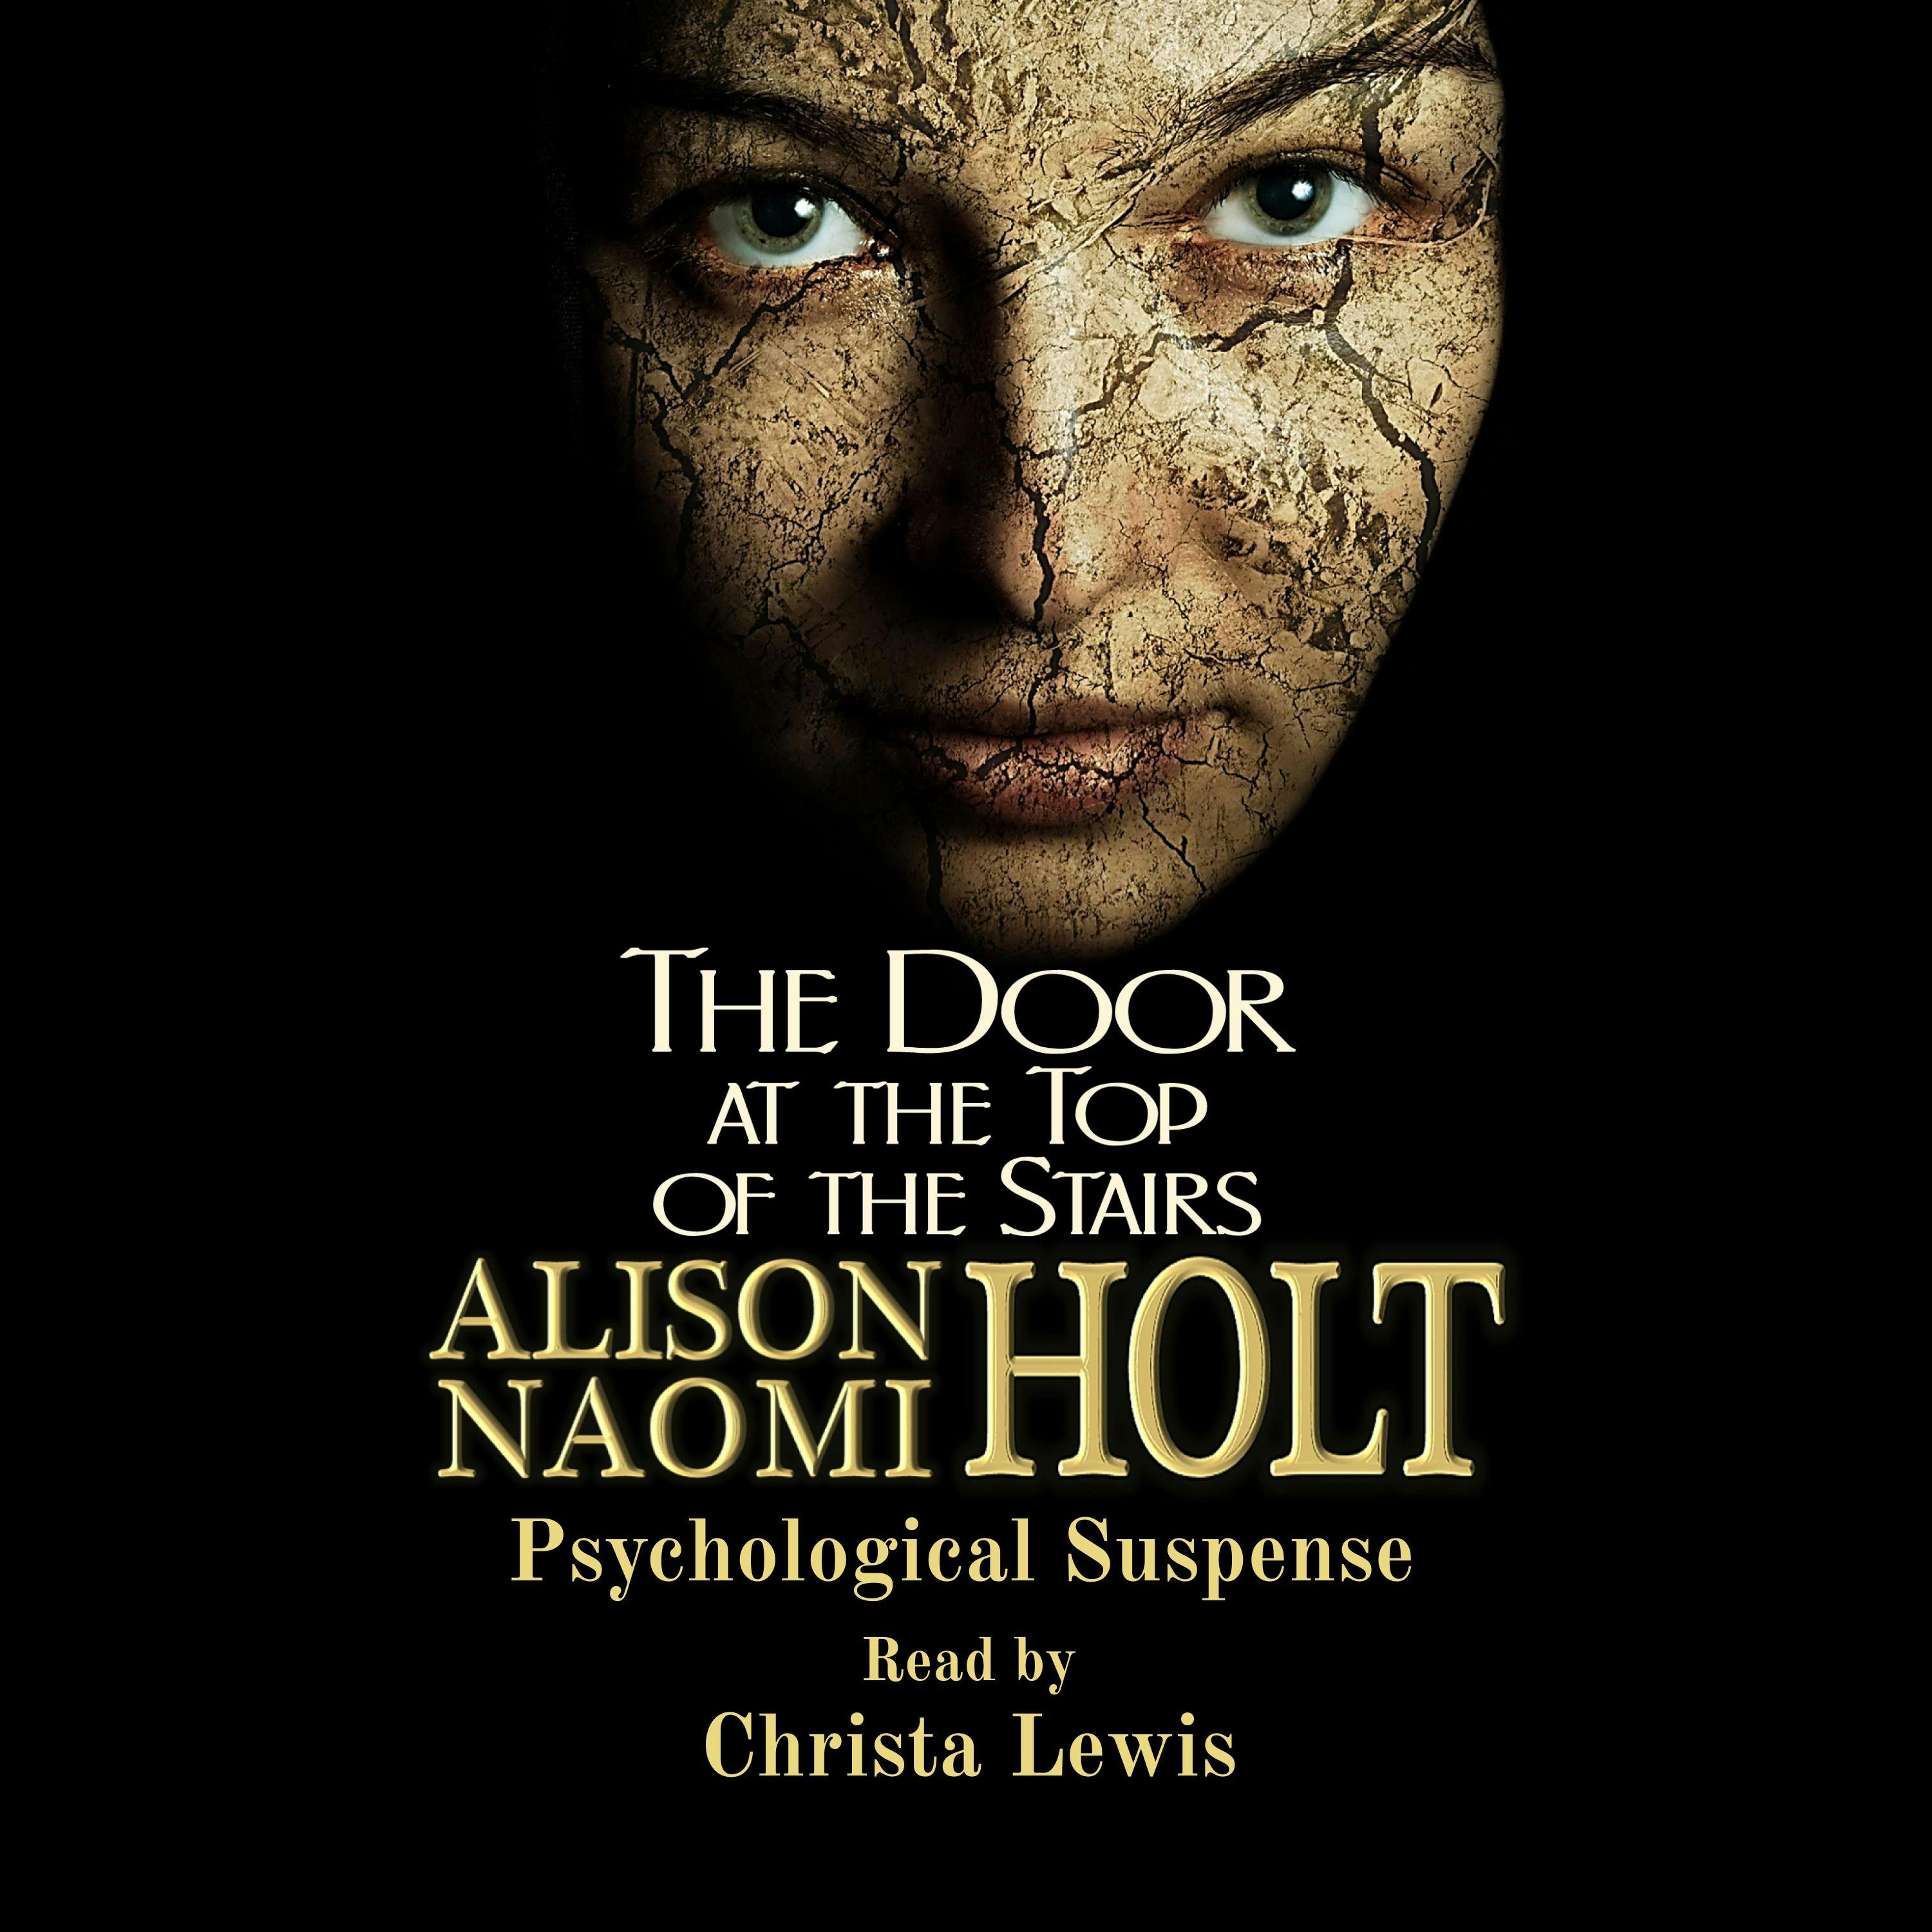 The Door at the Top of the Stairs - Alison Naomi Holt